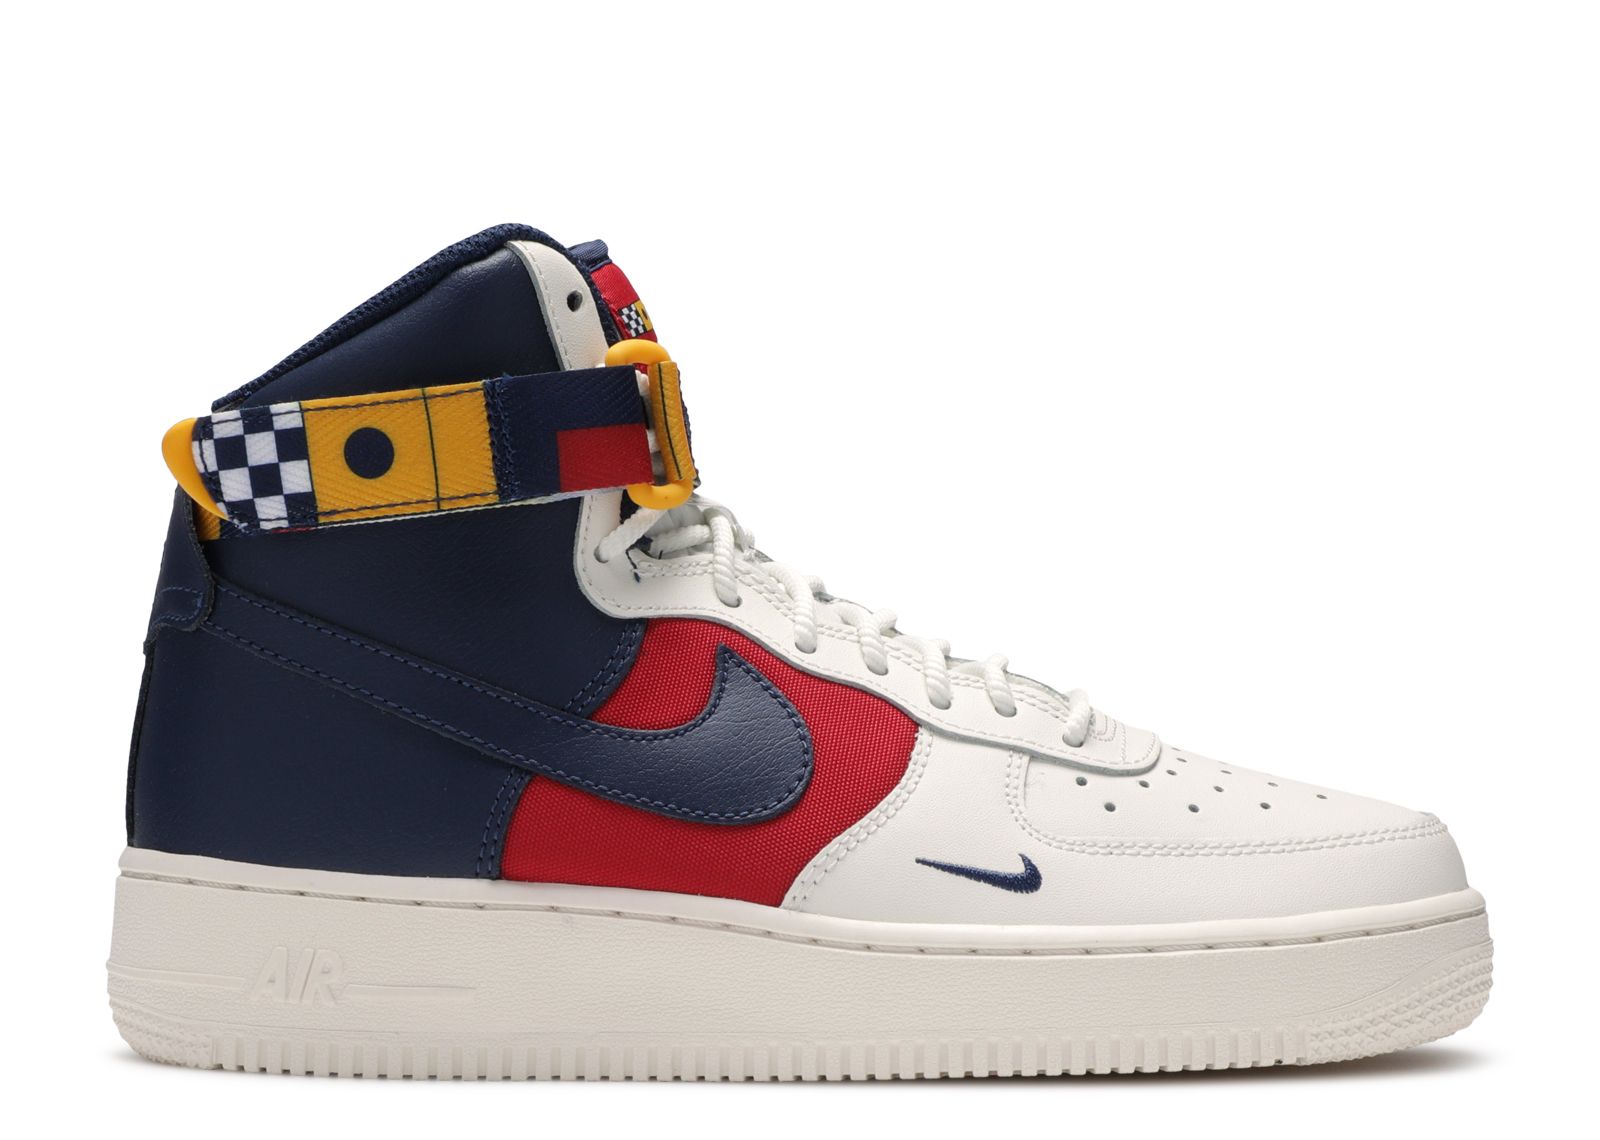 Air Force 1 High LV8 GS 'Multi Color' - Nike - AV7958 100 - sail/midnight  navy/gym red